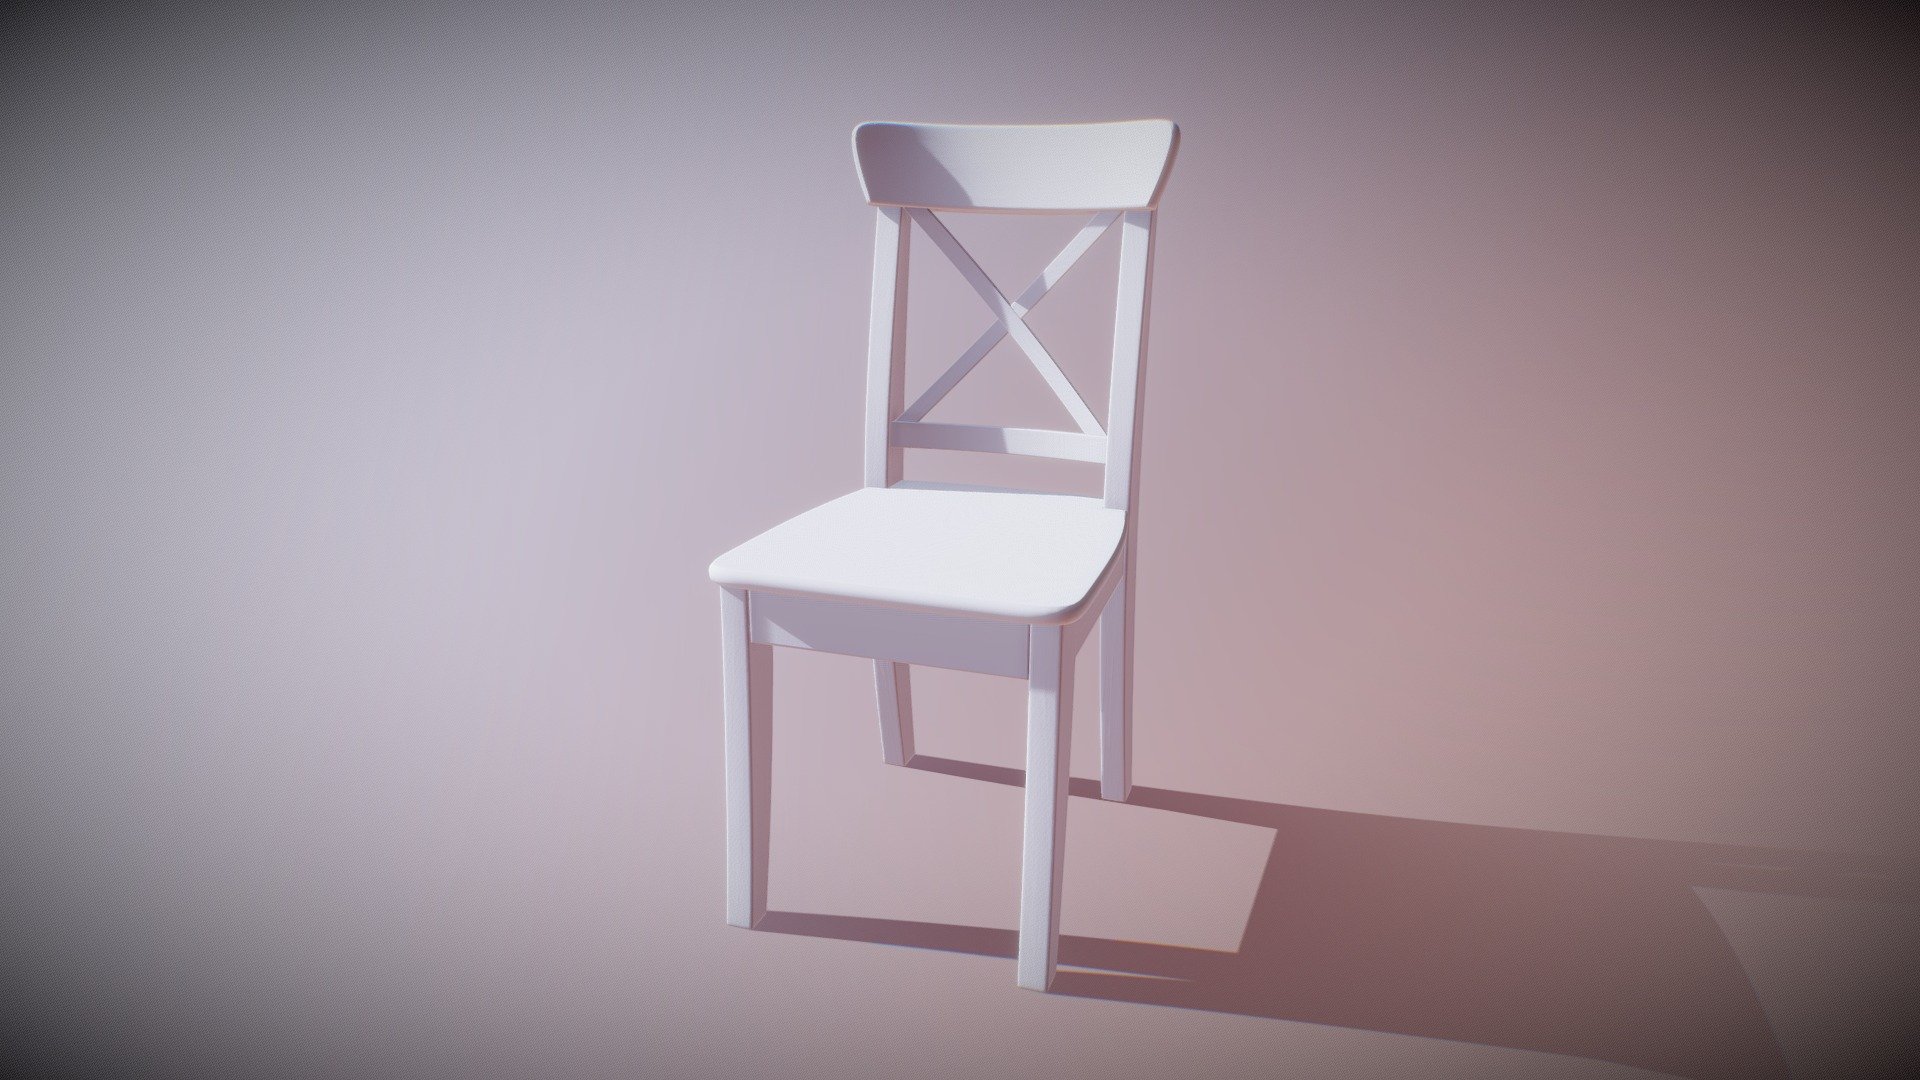 Ingolf Chair from IKEA.
The textures were made in Substance painter 3d model